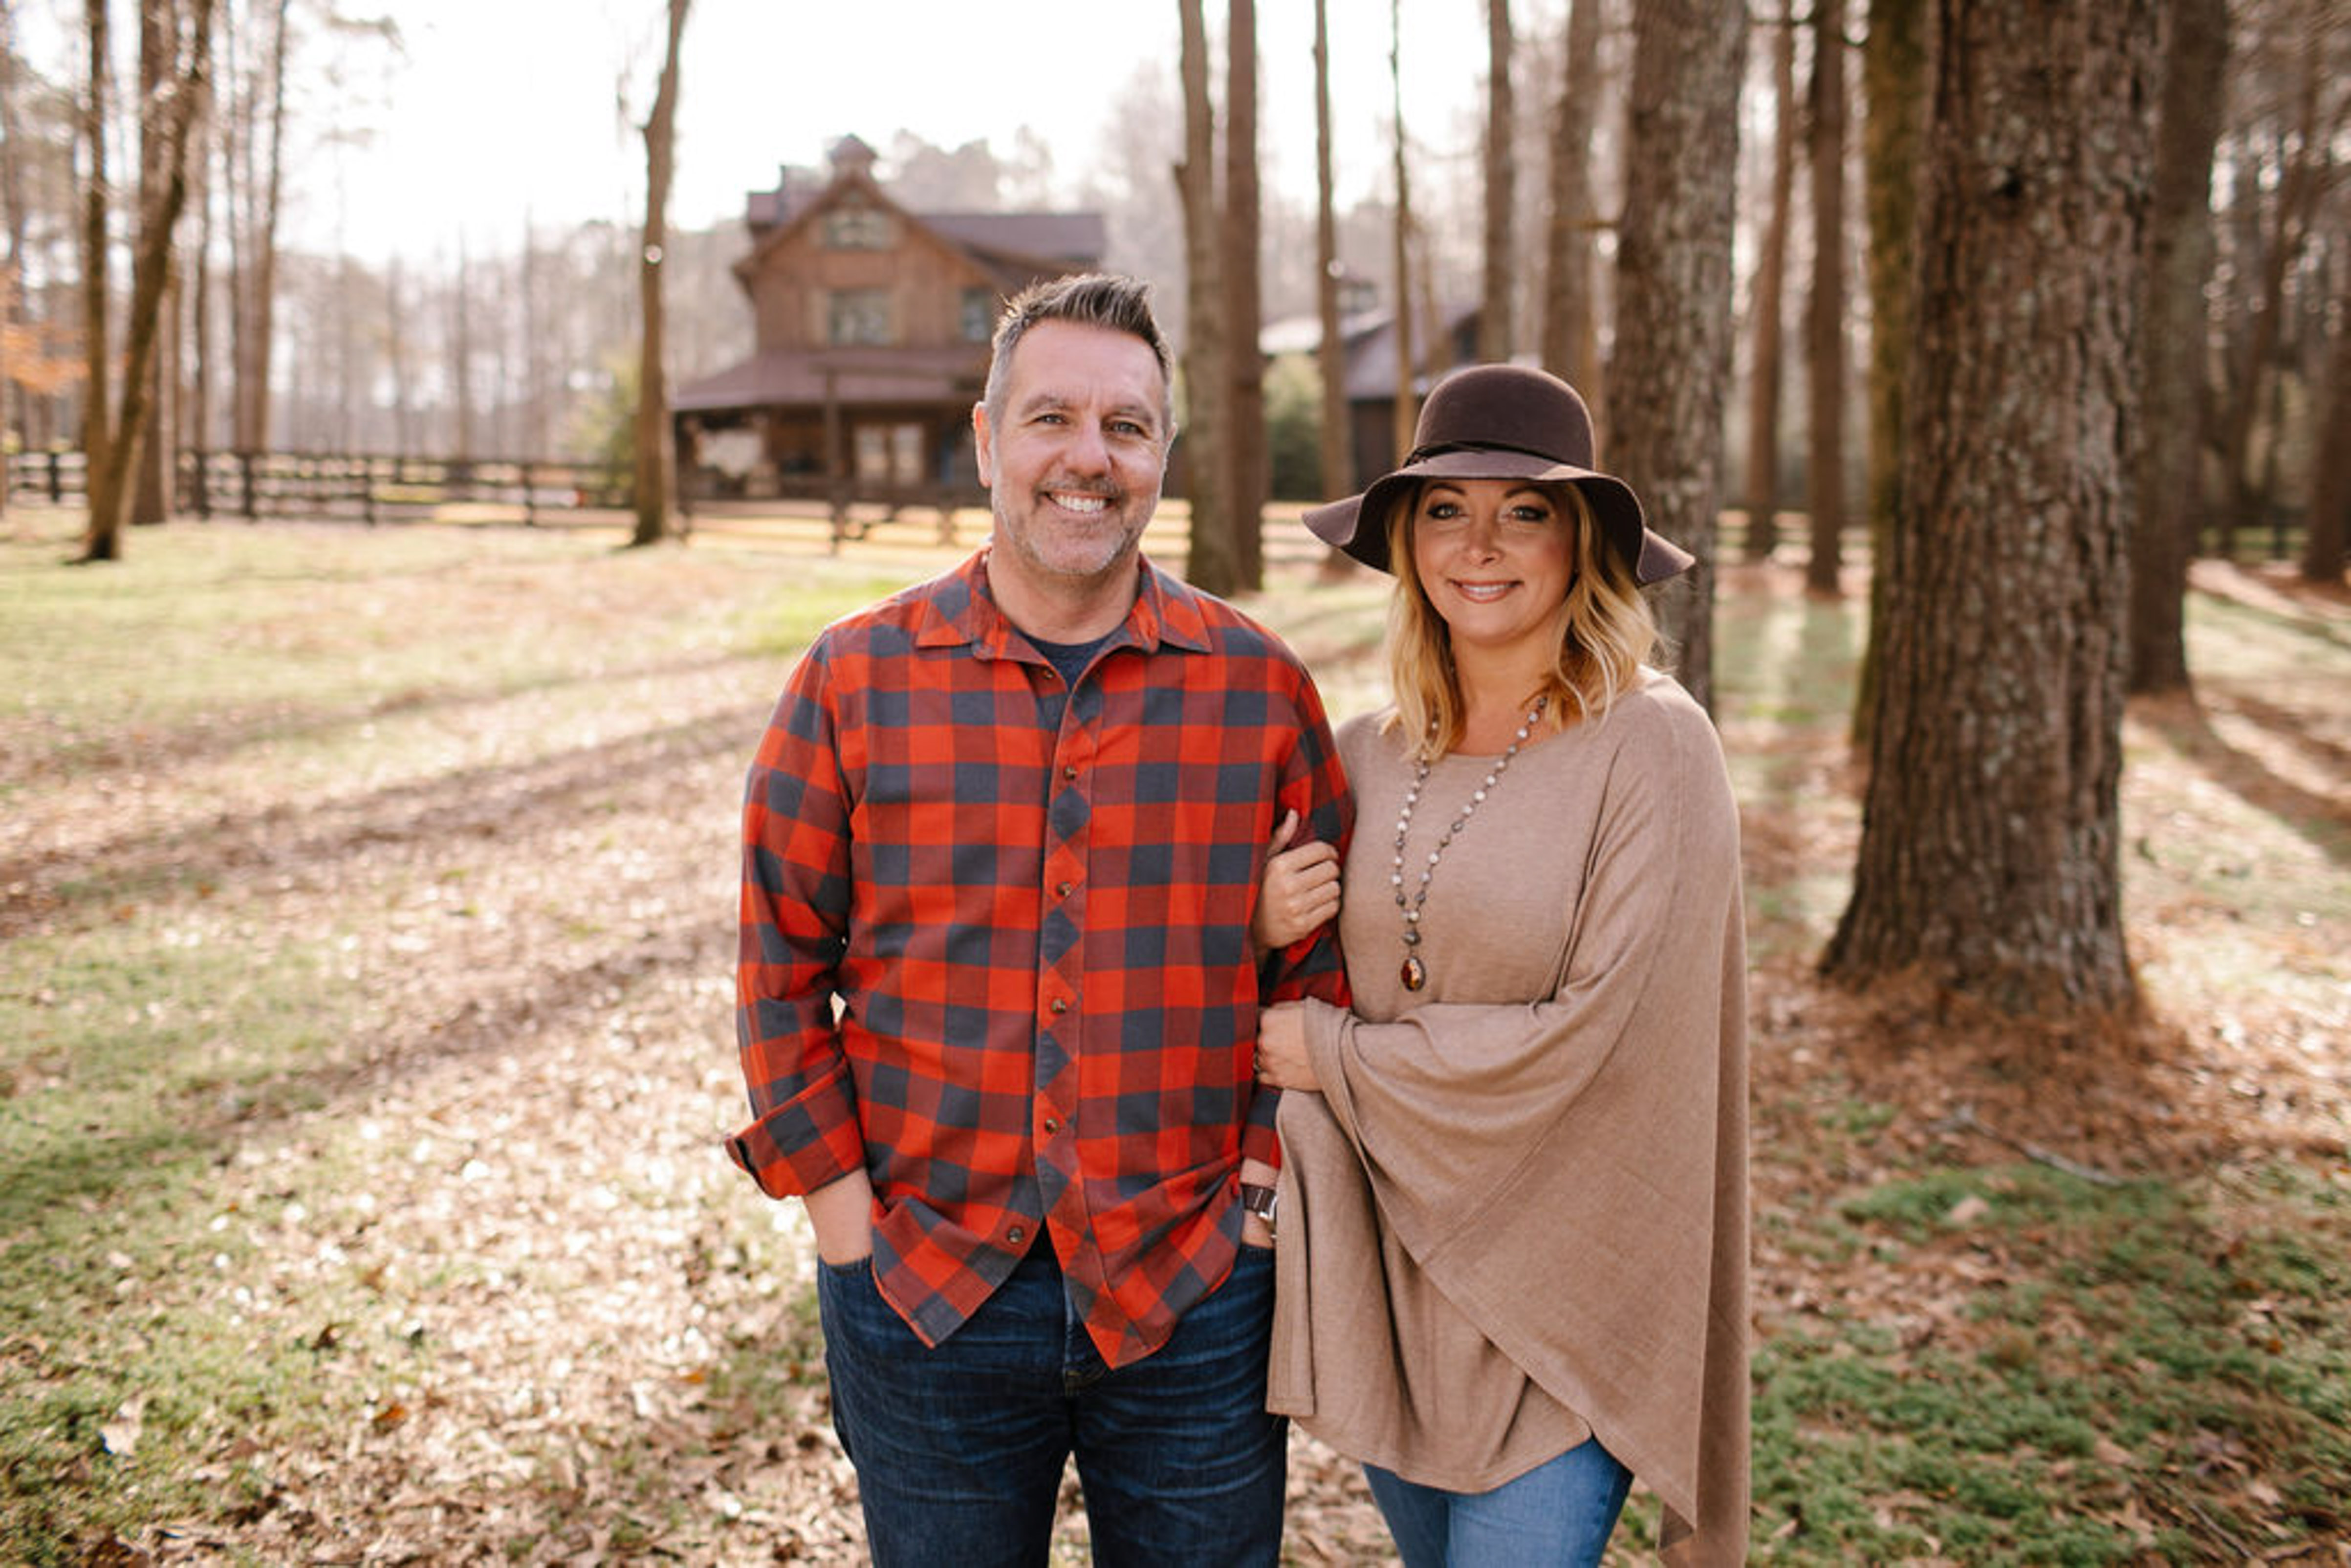 Shannon & Bryan Miles married entrepreneurs, standing together linked arms in wooded area in front of home